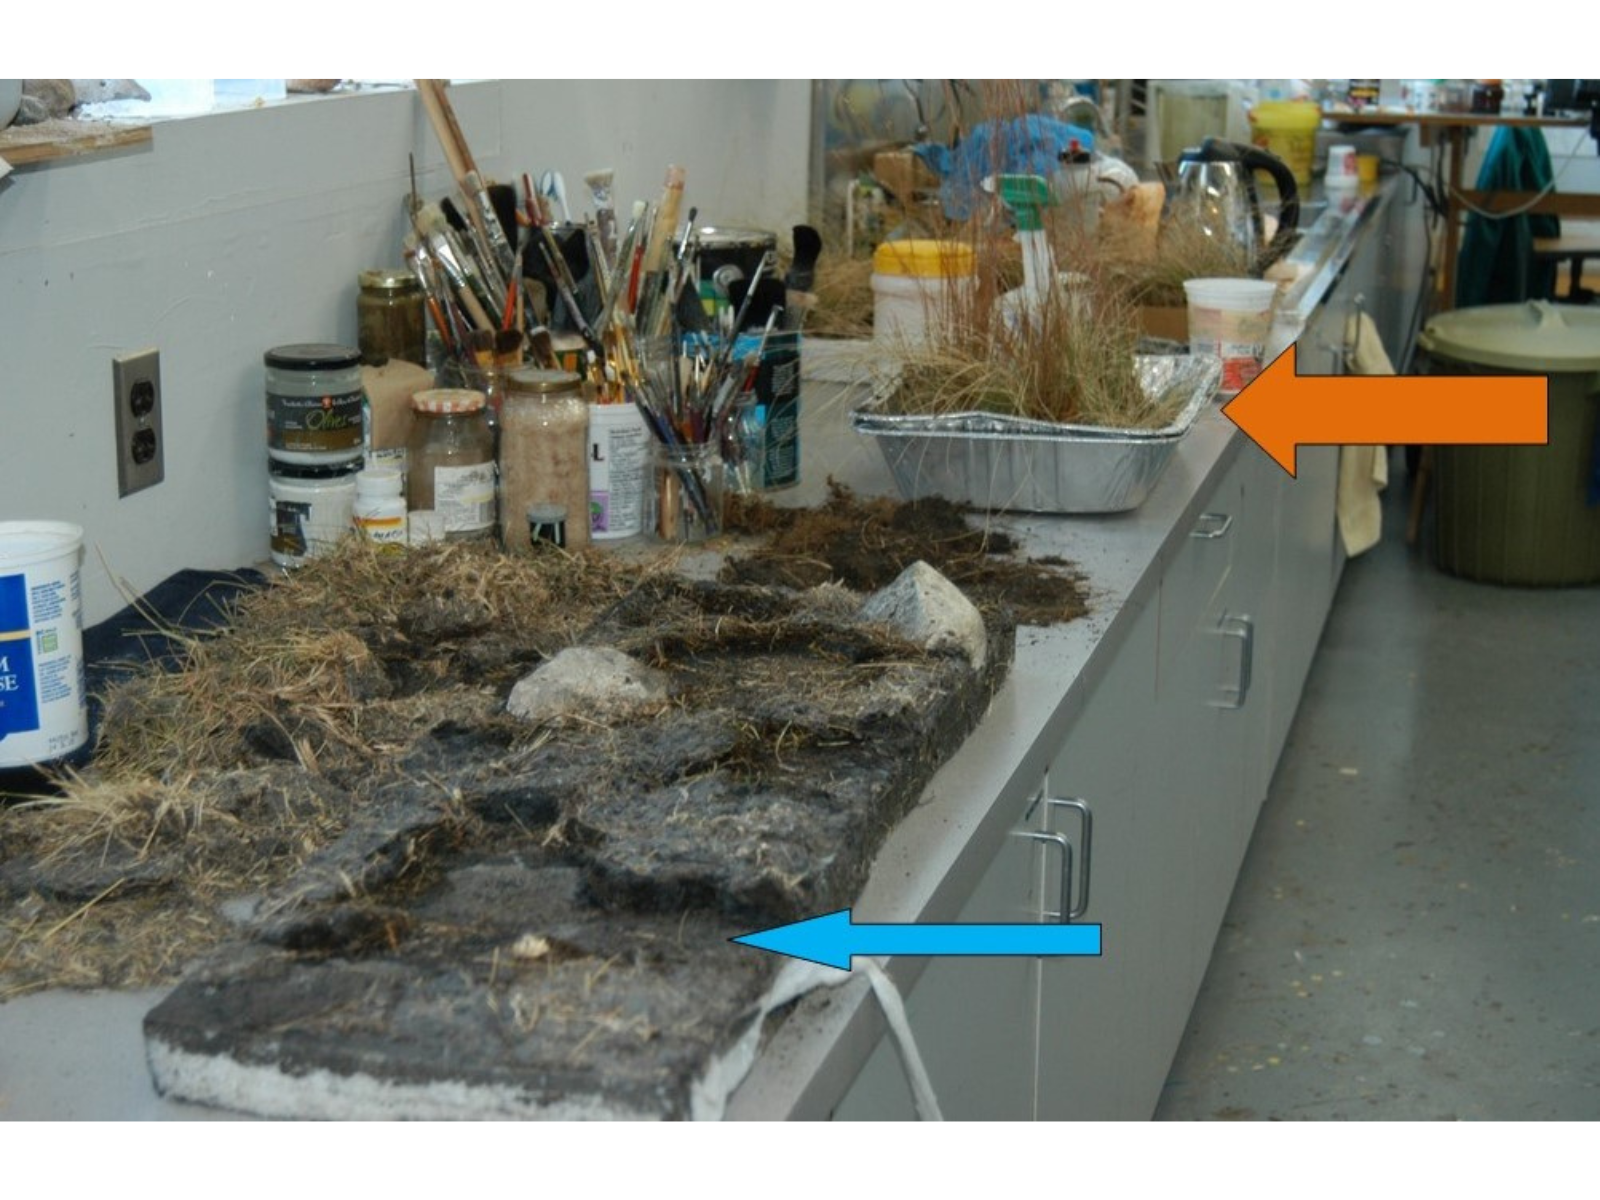 The same diorama portion as the previous three images on a countertop from the side. The white portions of foam have been painted to match the dirt (signified by a blue arrow), and in an aluminum tray sits several clumps of grasses (signified with an orange arrow).